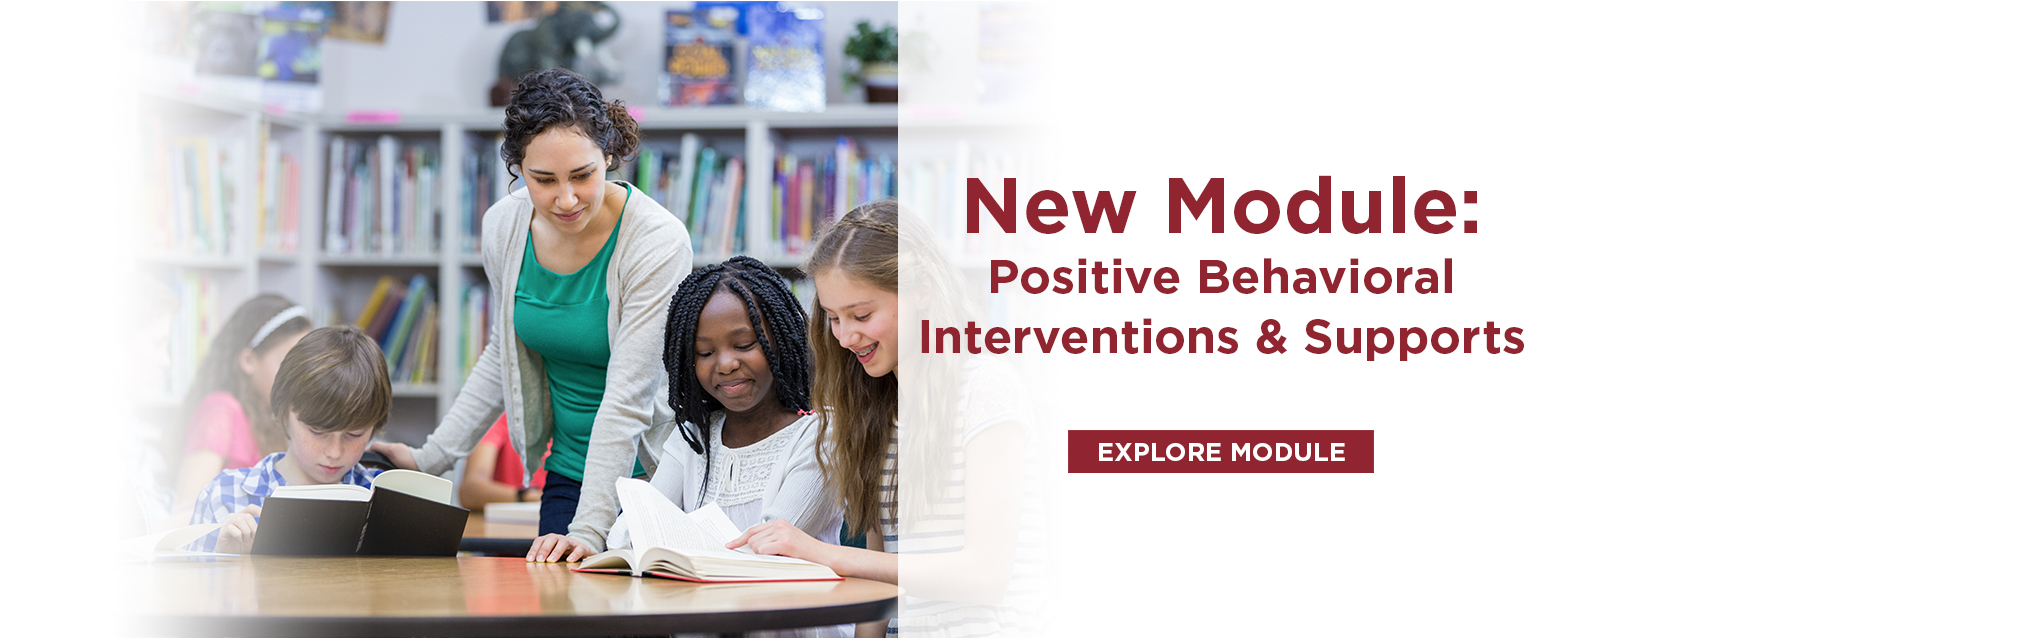 New Module: Positive Behavioral Interventions and Supports